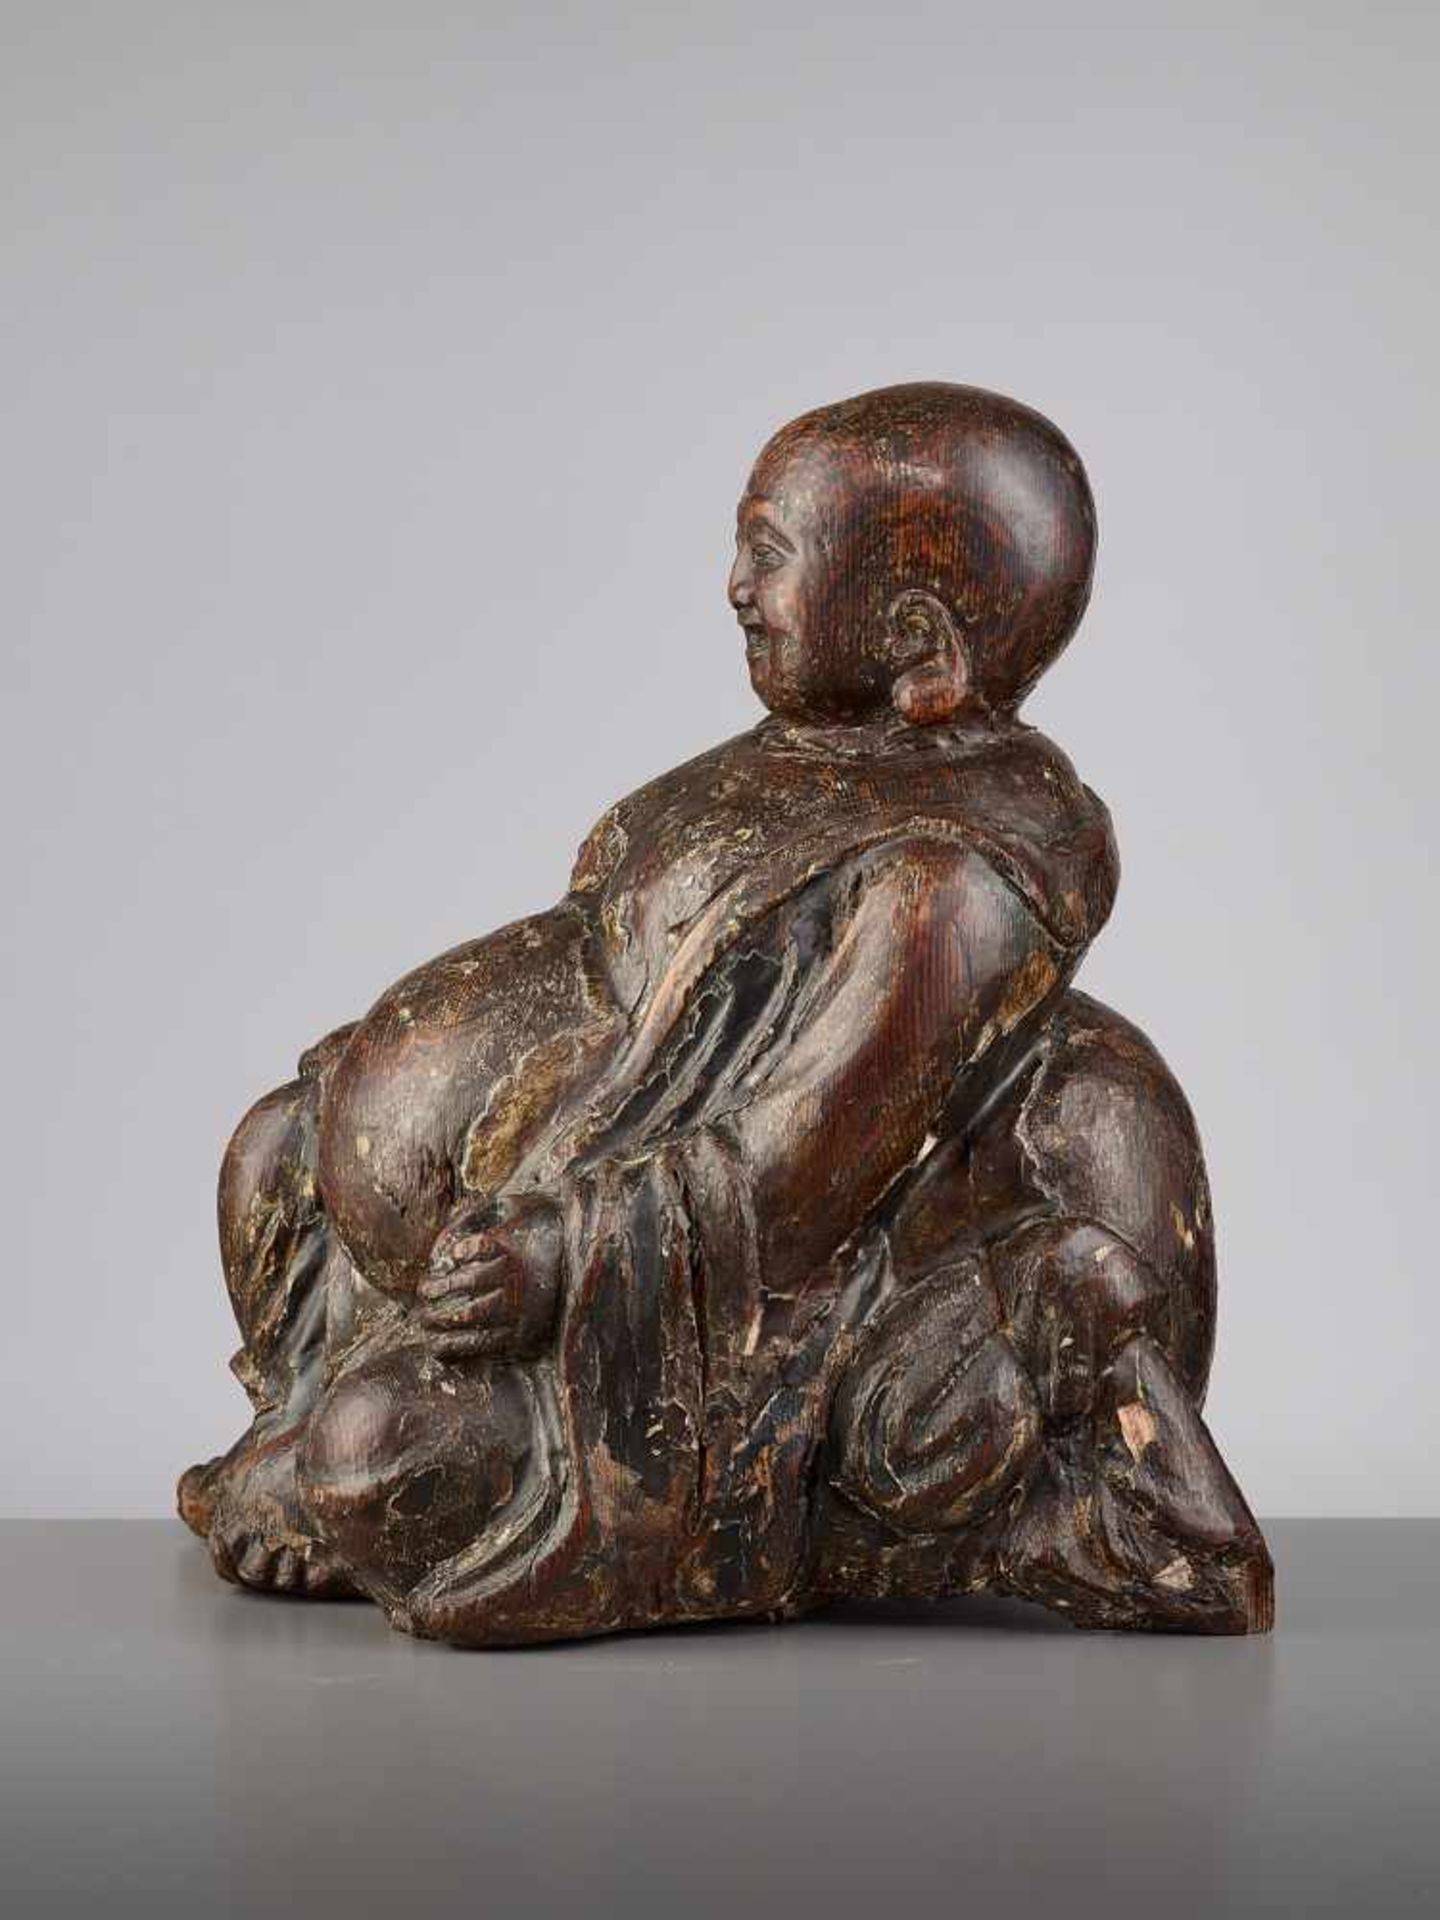 AN EXPRESSIVE WOOD BUDAI, MINGChina, 15th - 16th century. This earthy yet radiant sculpture of Budai - Image 5 of 9